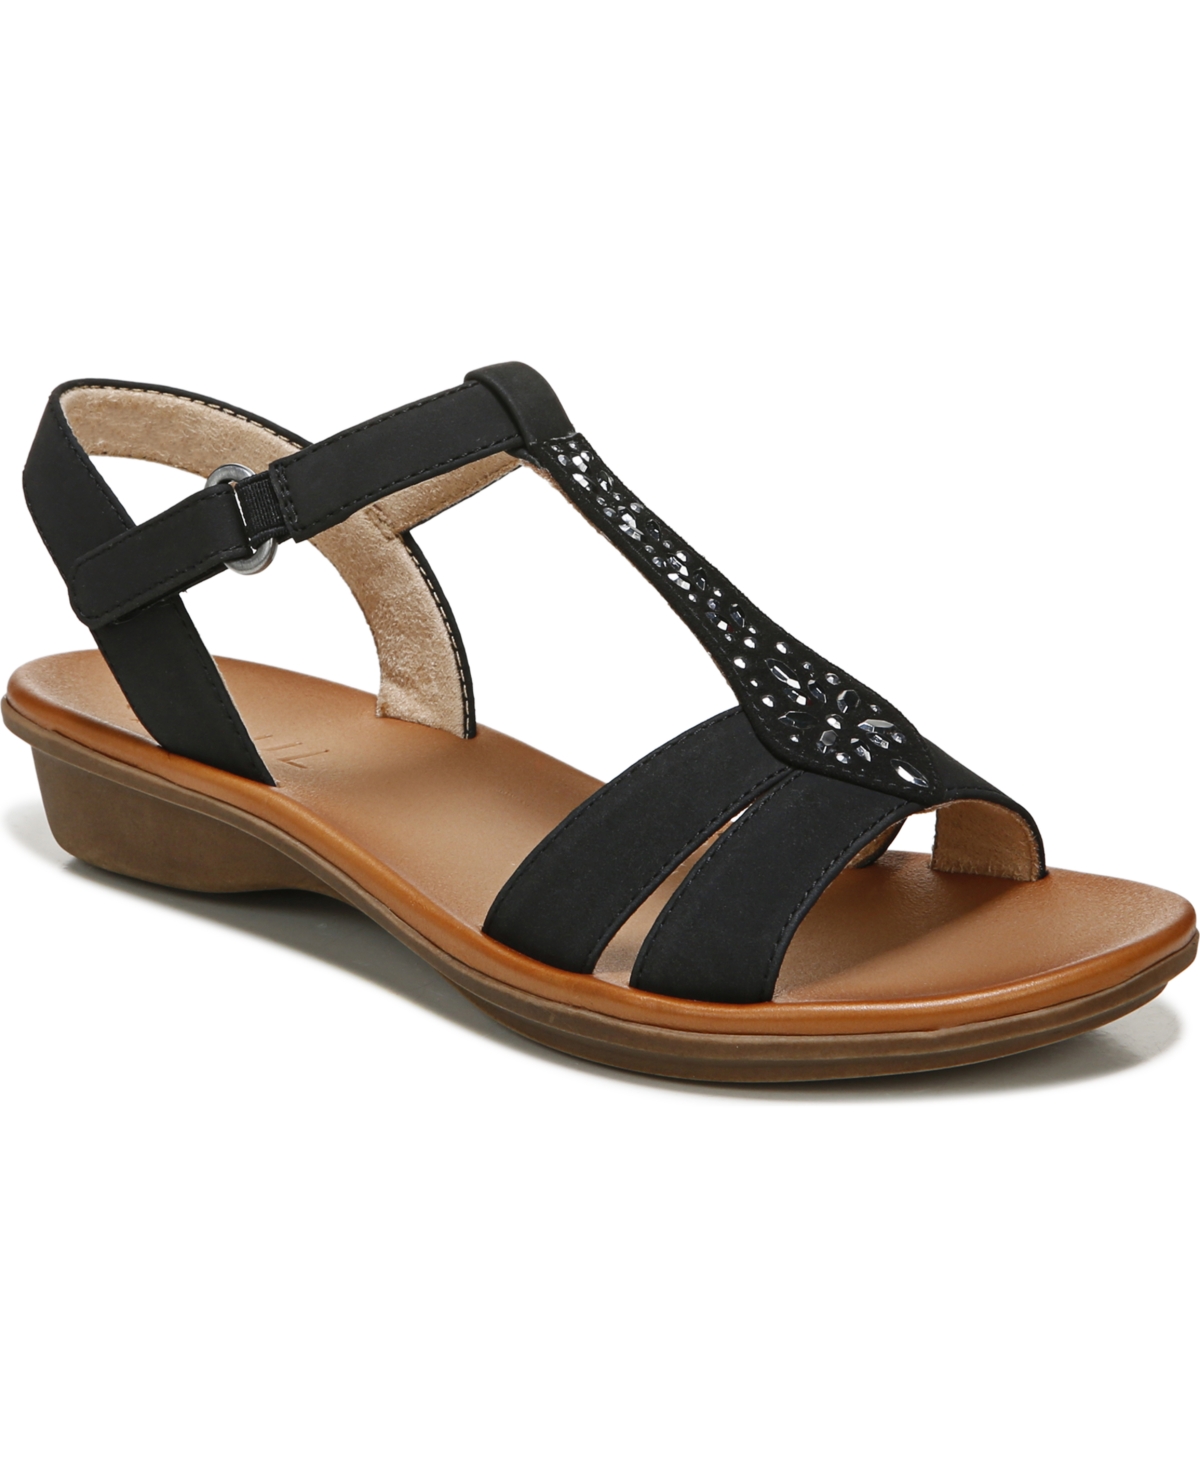 Soul Naturalizer Summer Ankle Strap Sandals Women's Shoes In Black Faux Leather